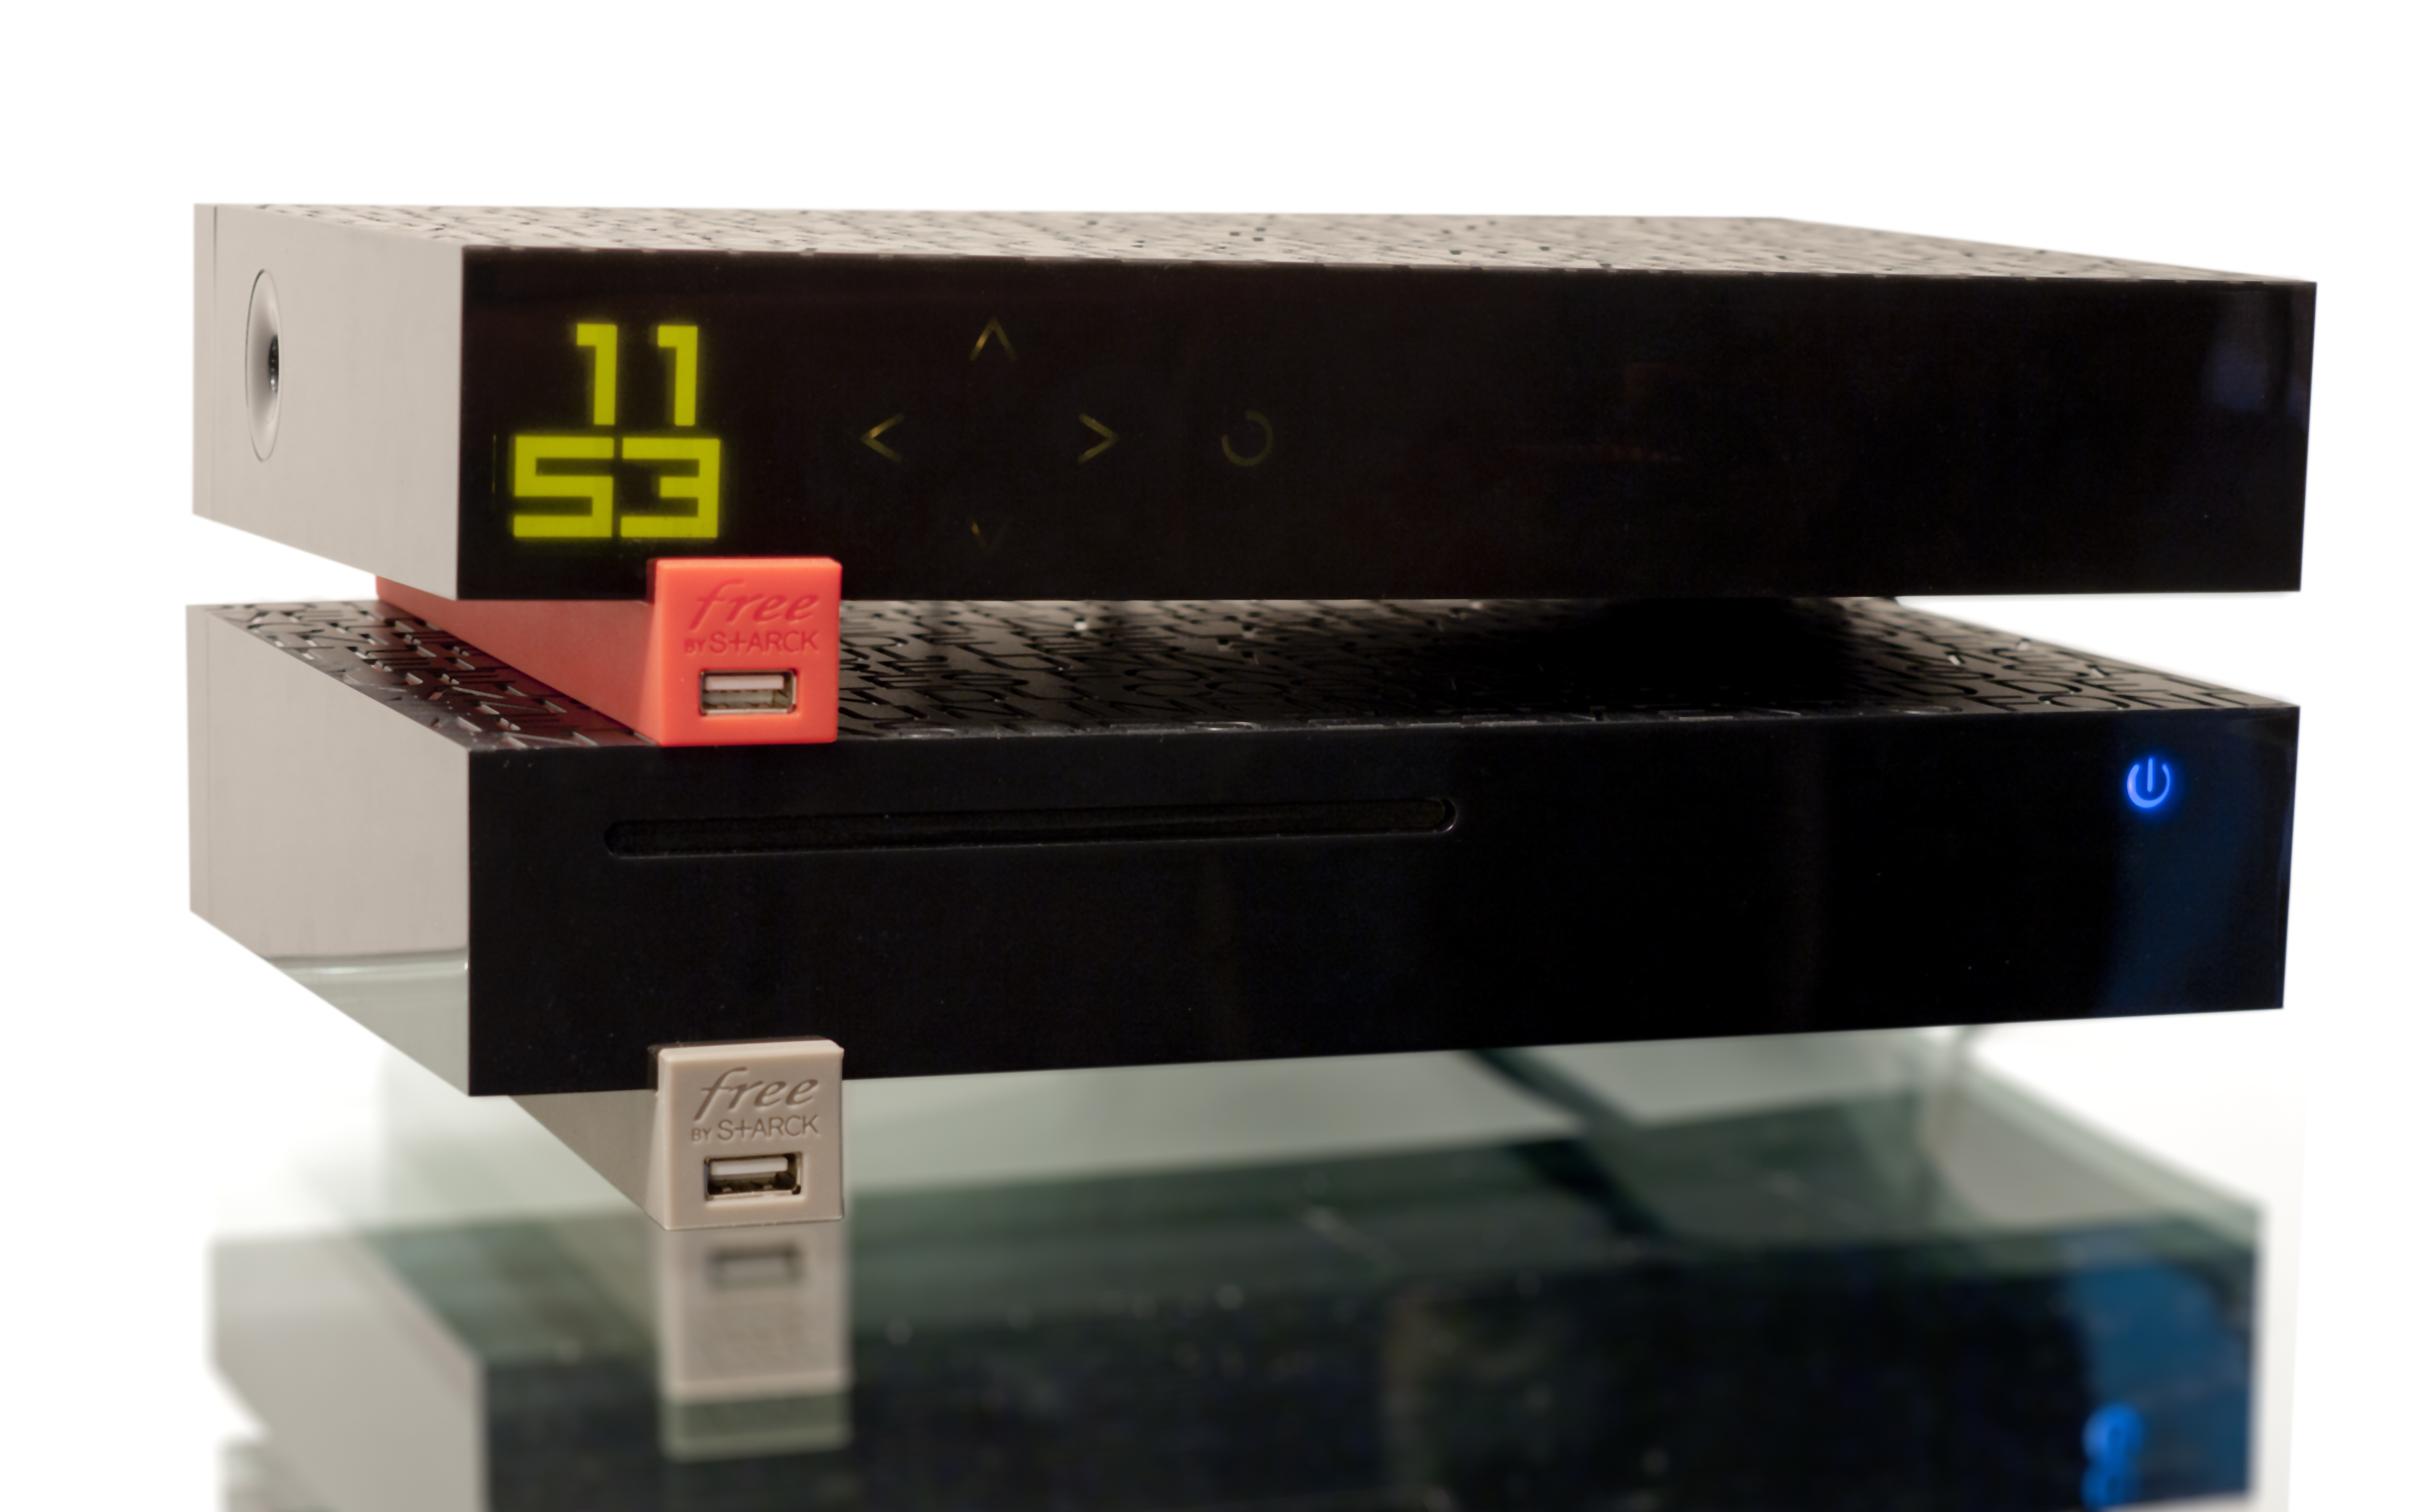 A Shazam-like service integrated in a set-top box